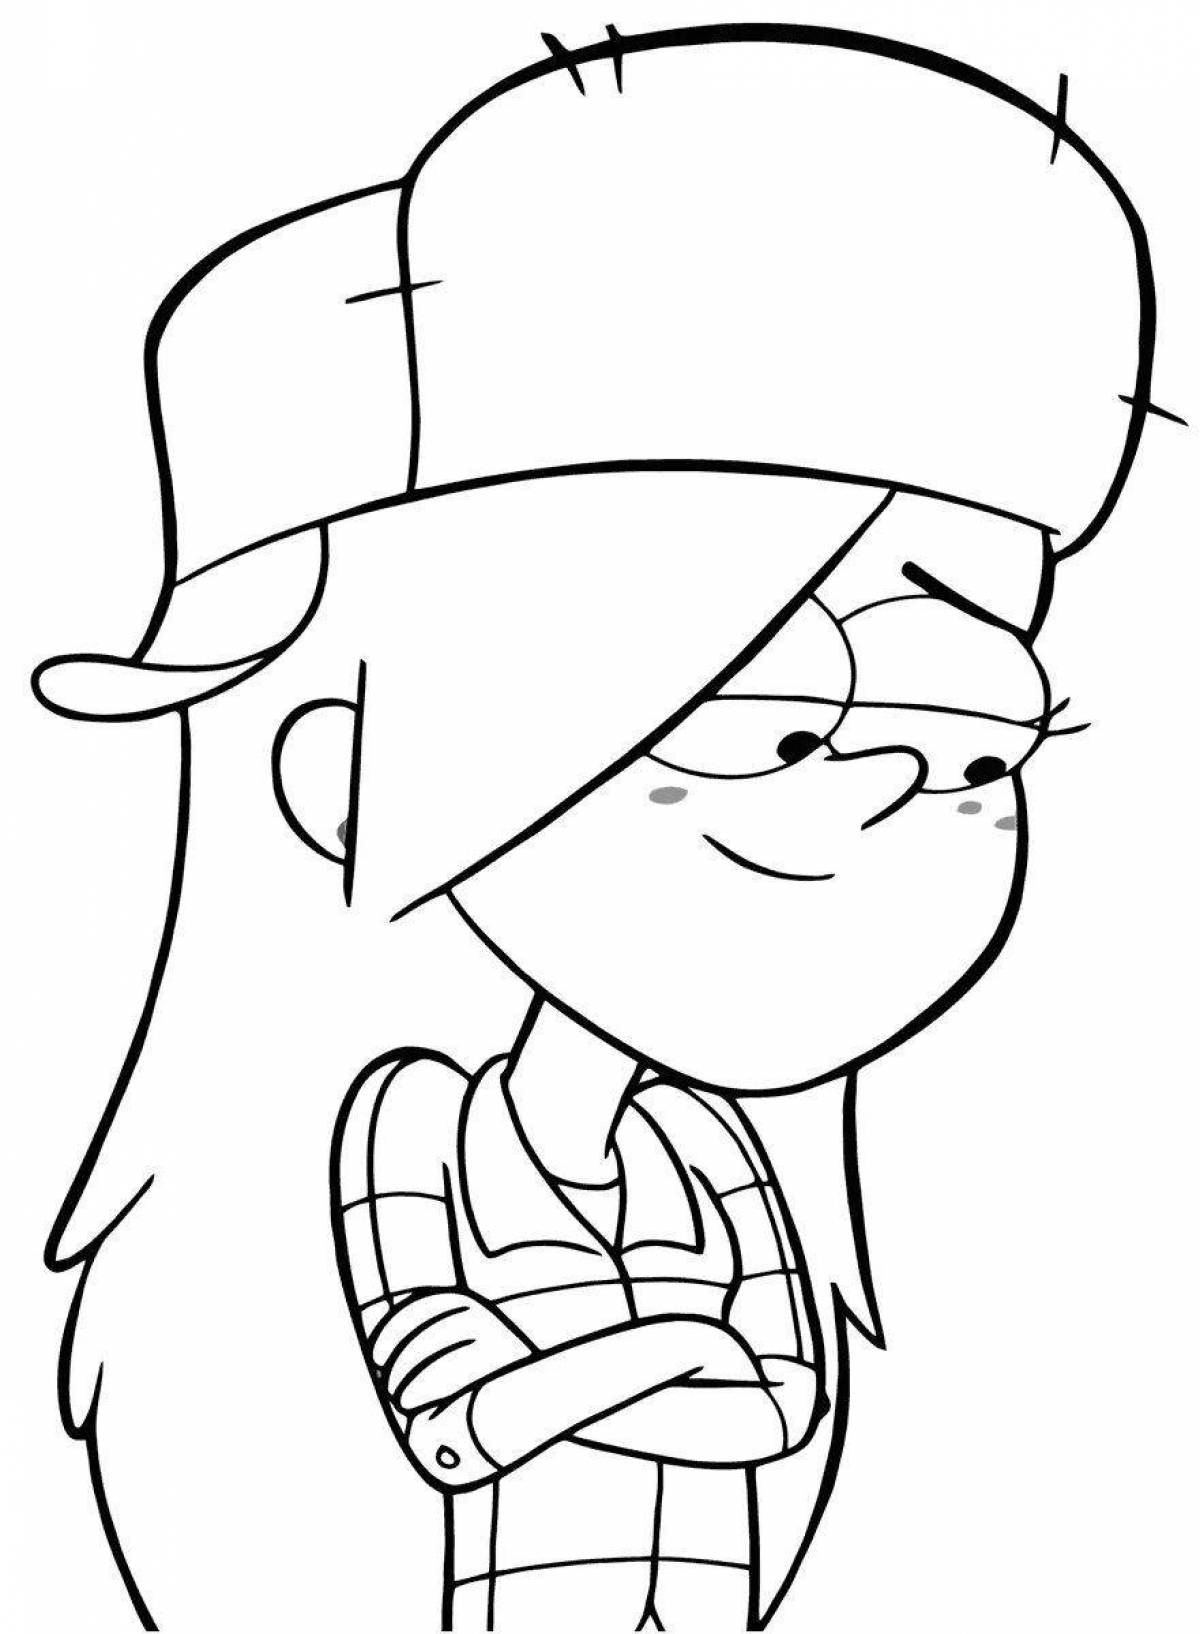 Attractive dipper pines coloring